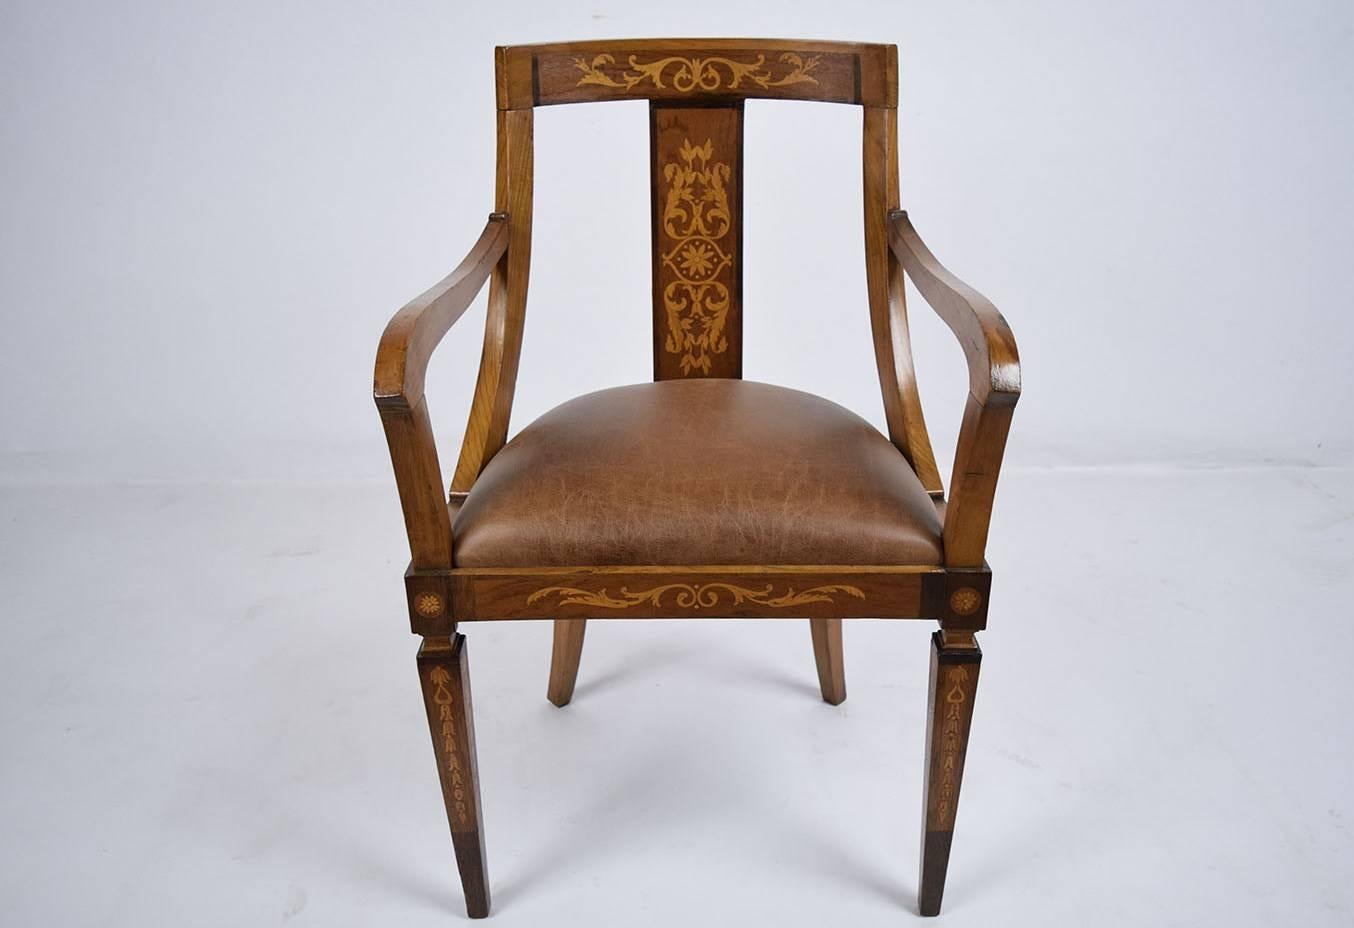 This 1900s antique English Regency-style armchair is made of wood that has been finished in a light walnut color stain. The frame features a curved black with complimenting carved arms. Adoring the front of the chair frame is exquisite inlaid